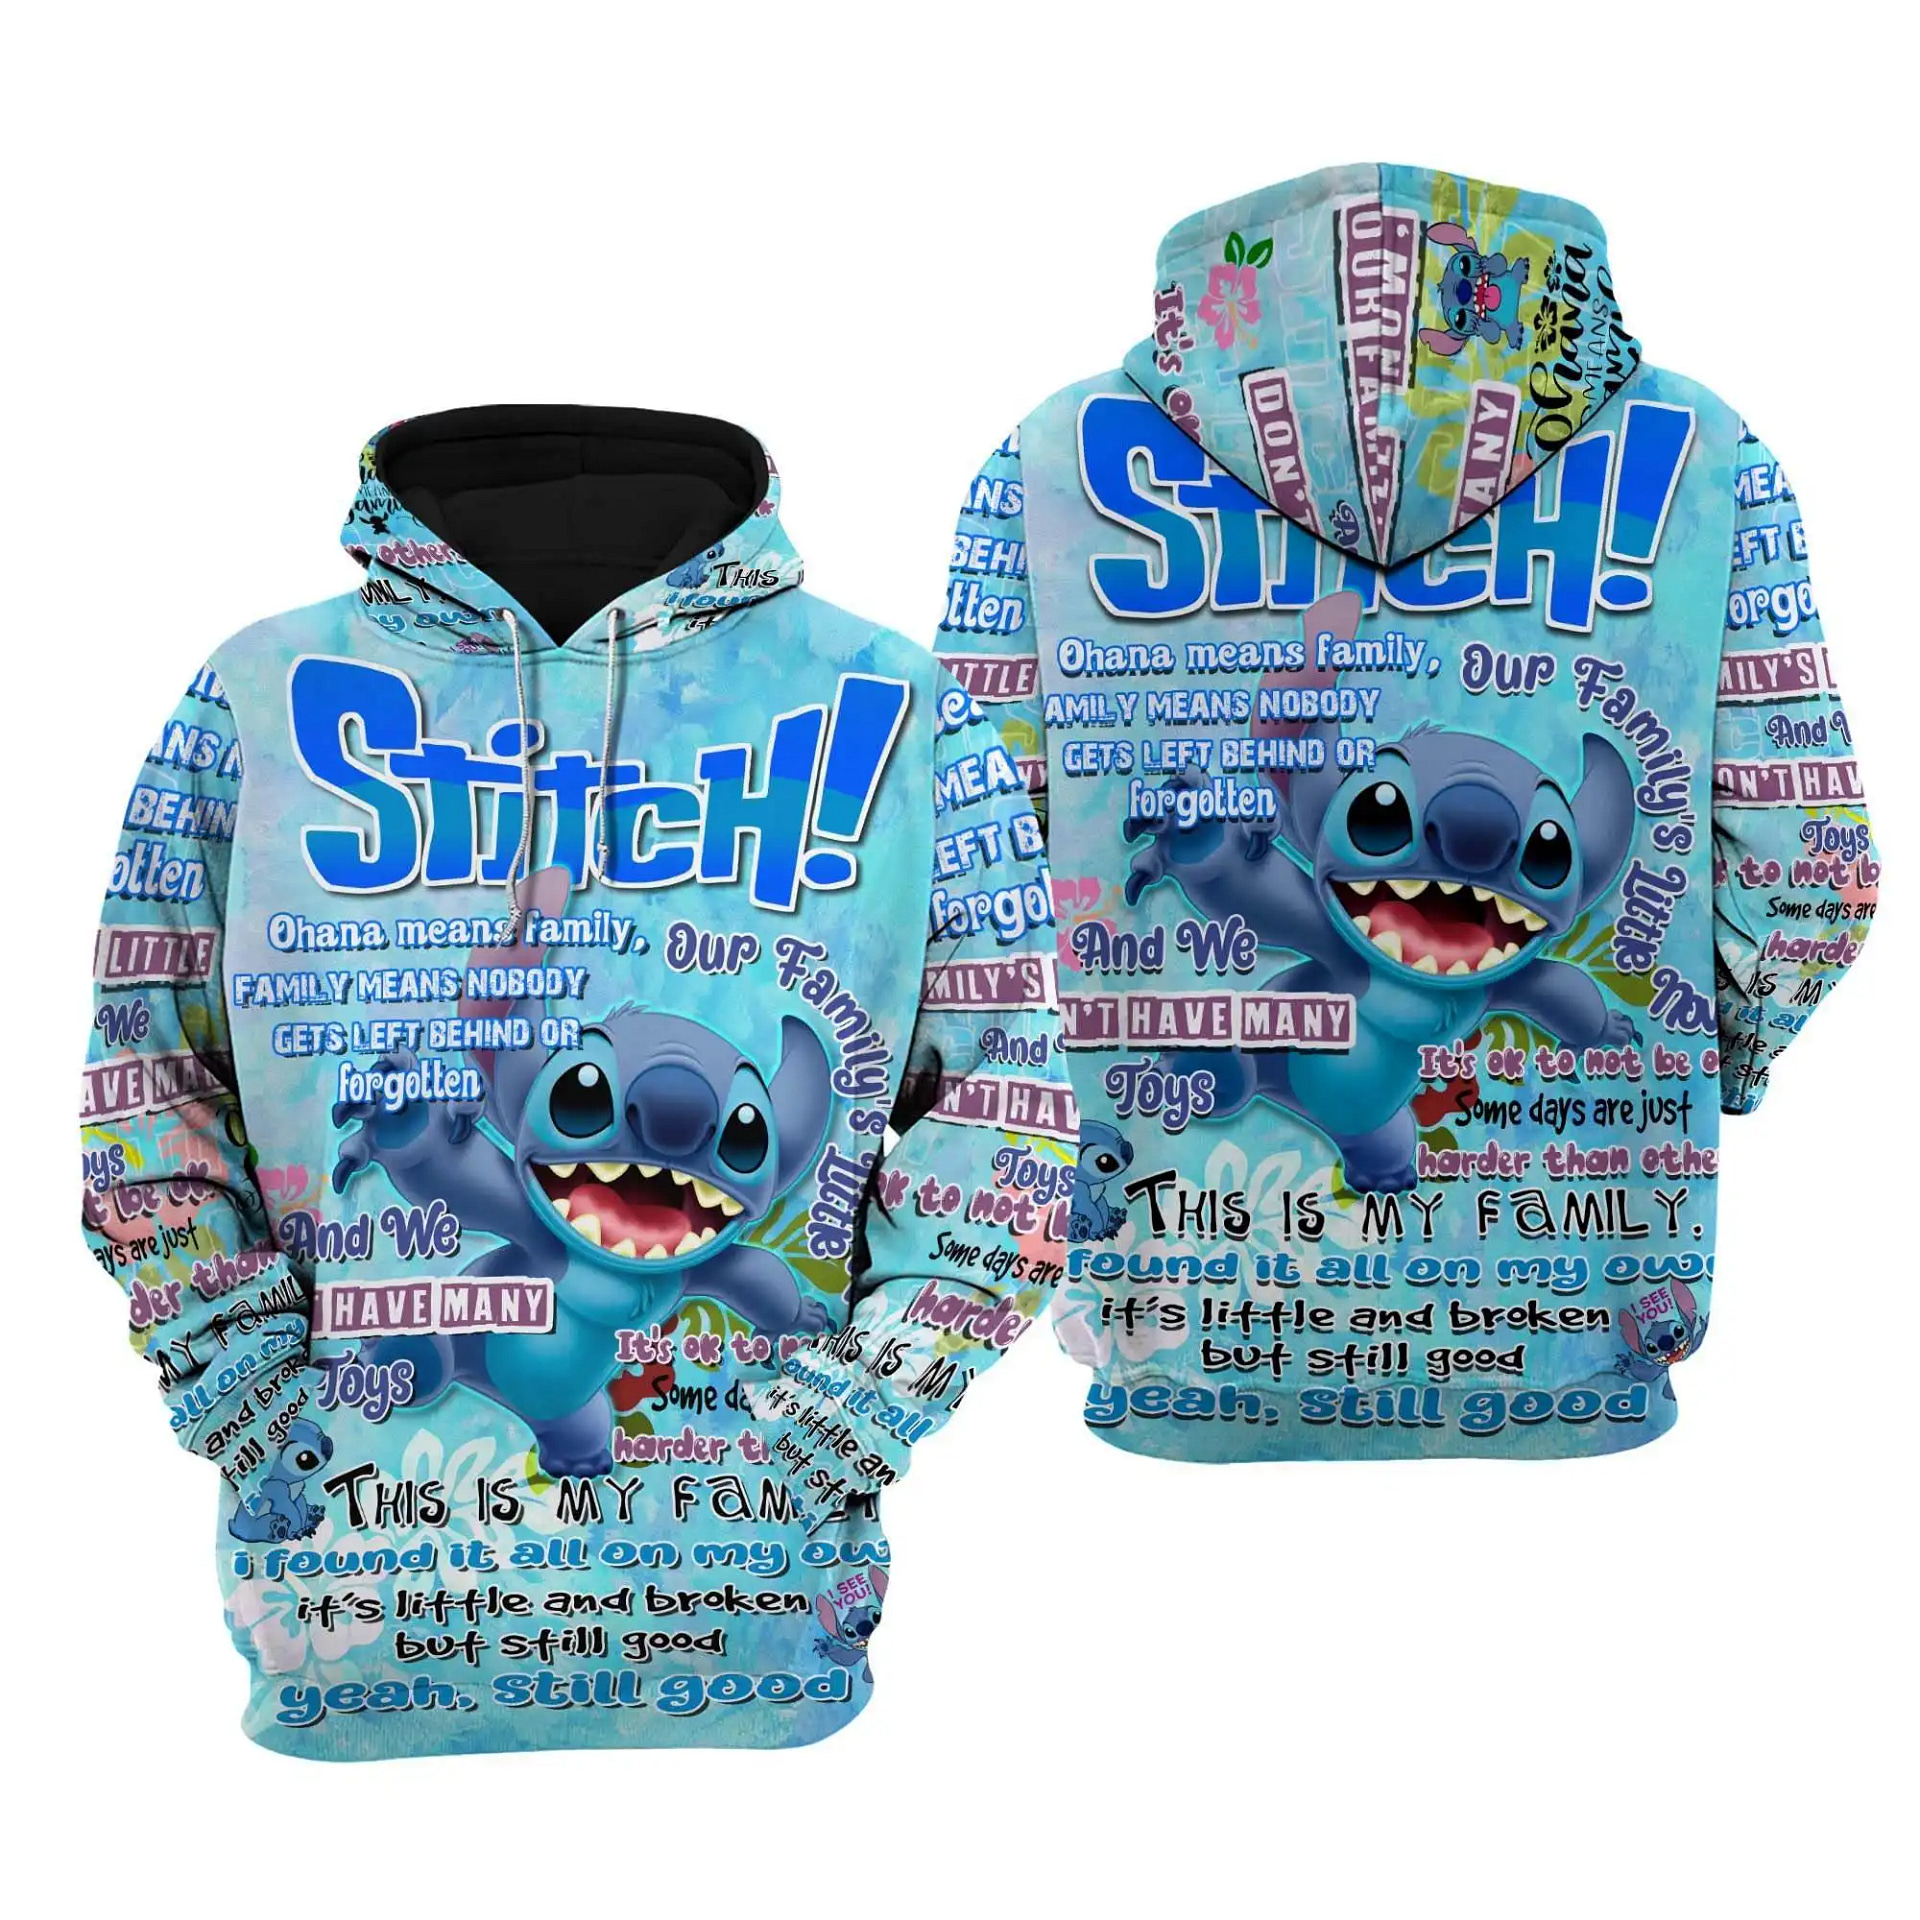 Lilo Stitch Punk Words Pattern Disney Quotes Cartoon Graphic Outfits Clothing Men Women Kids Toddlers Hoodie 3D